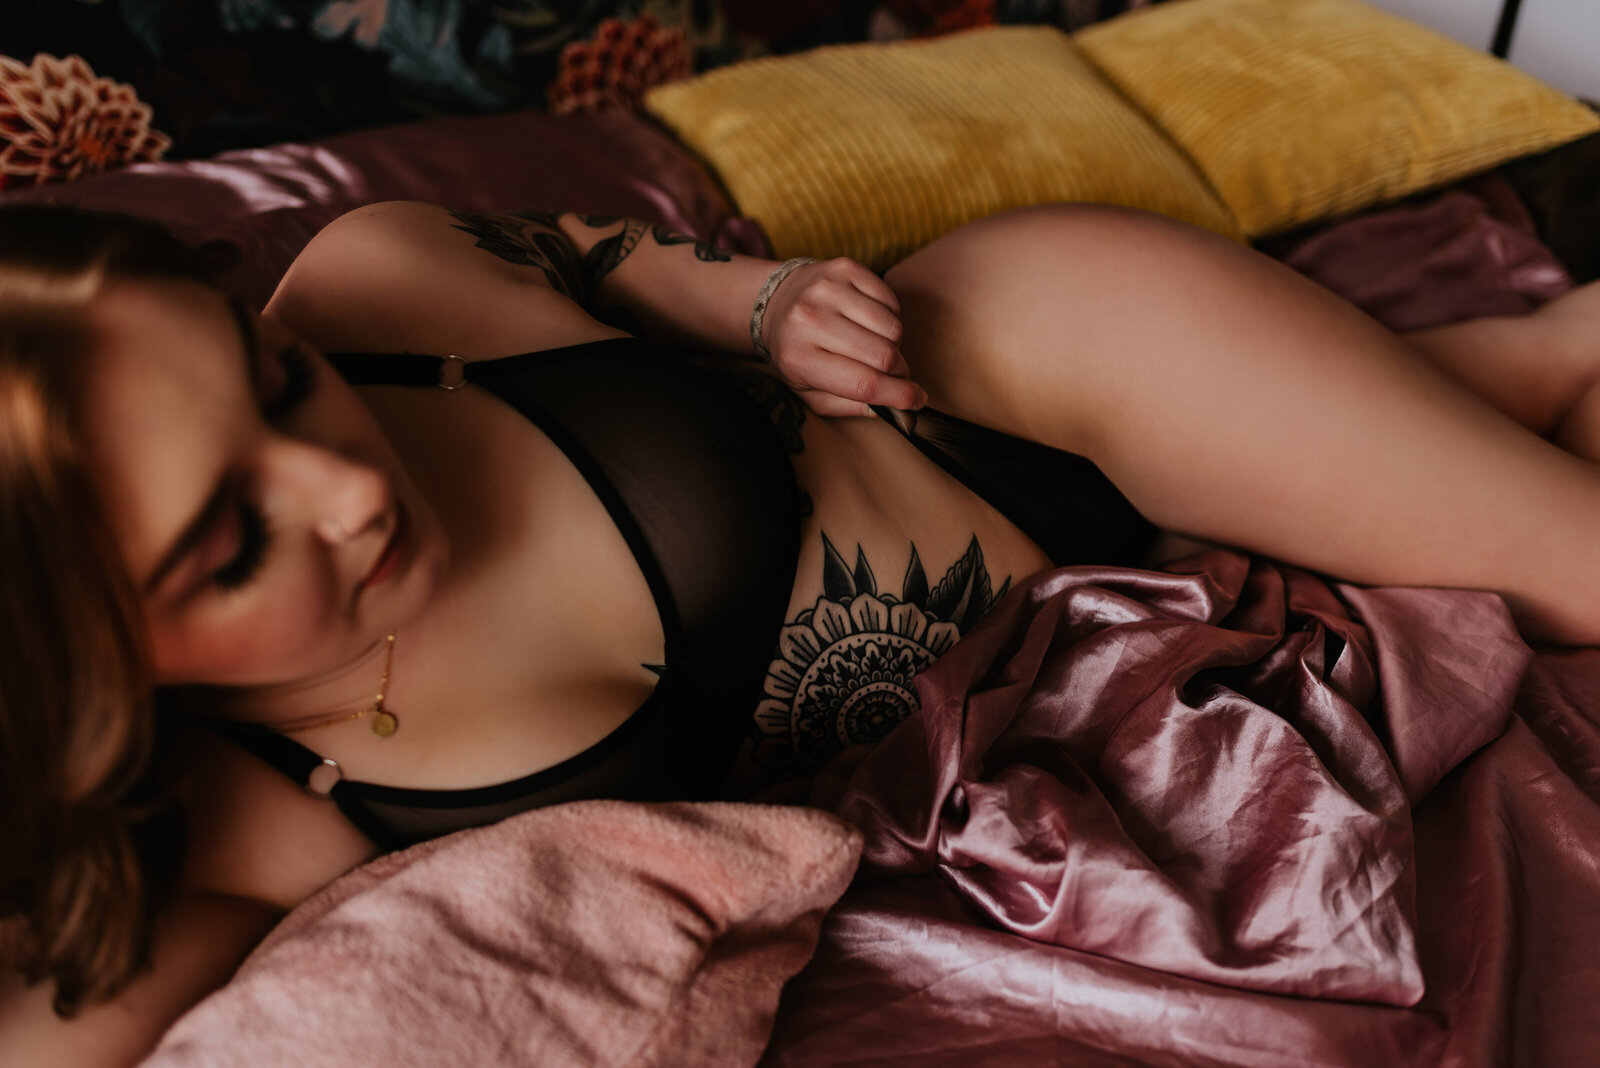 Riley Laurel Boudoir is a luxury boudoir experience located in Kamloops, British Columbia. We offer boudoir sessions for all bodies and every body. Book your session today!